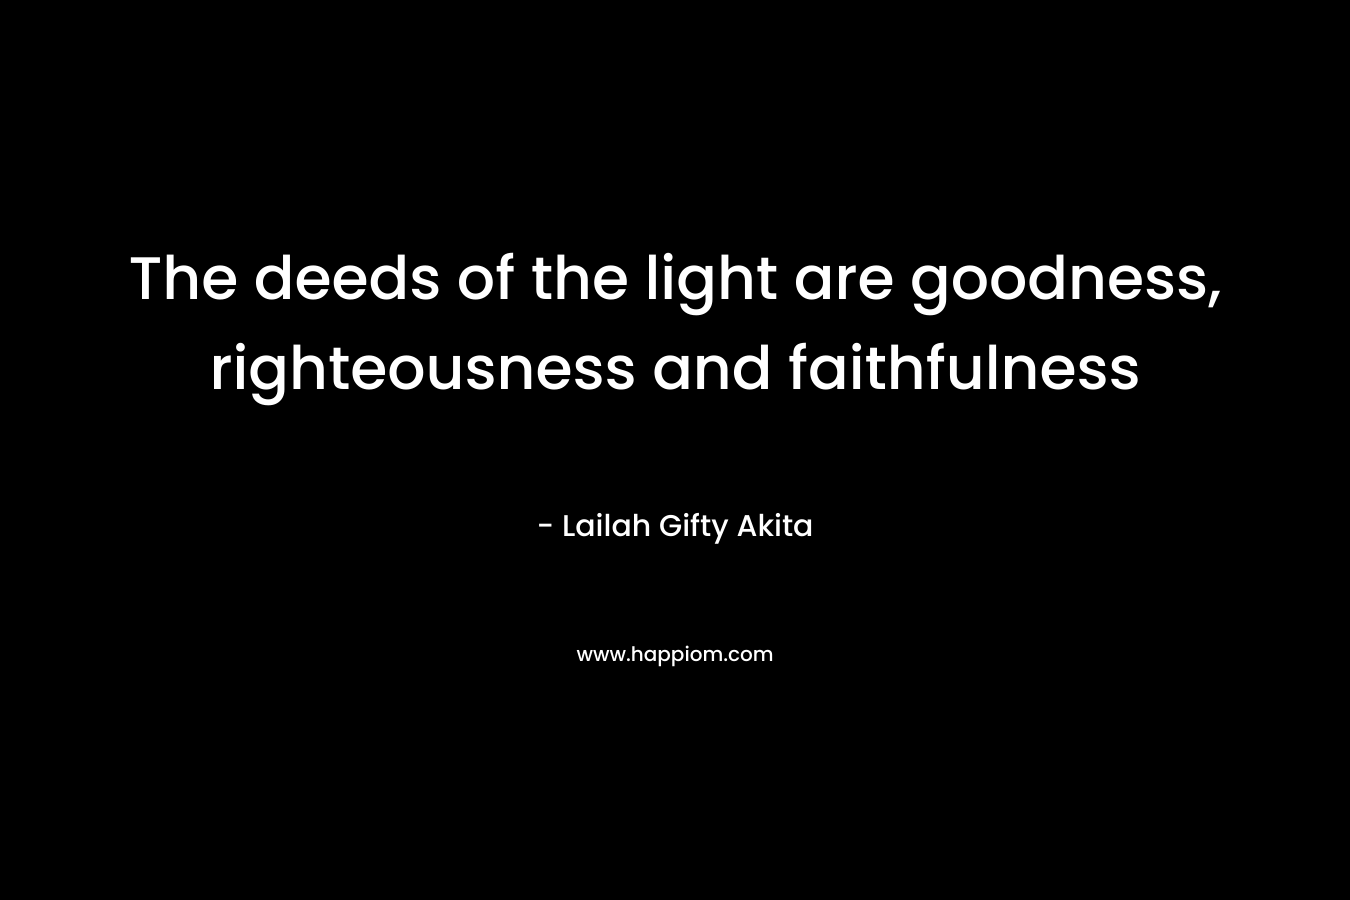 The deeds of the light are goodness, righteousness and faithfulness